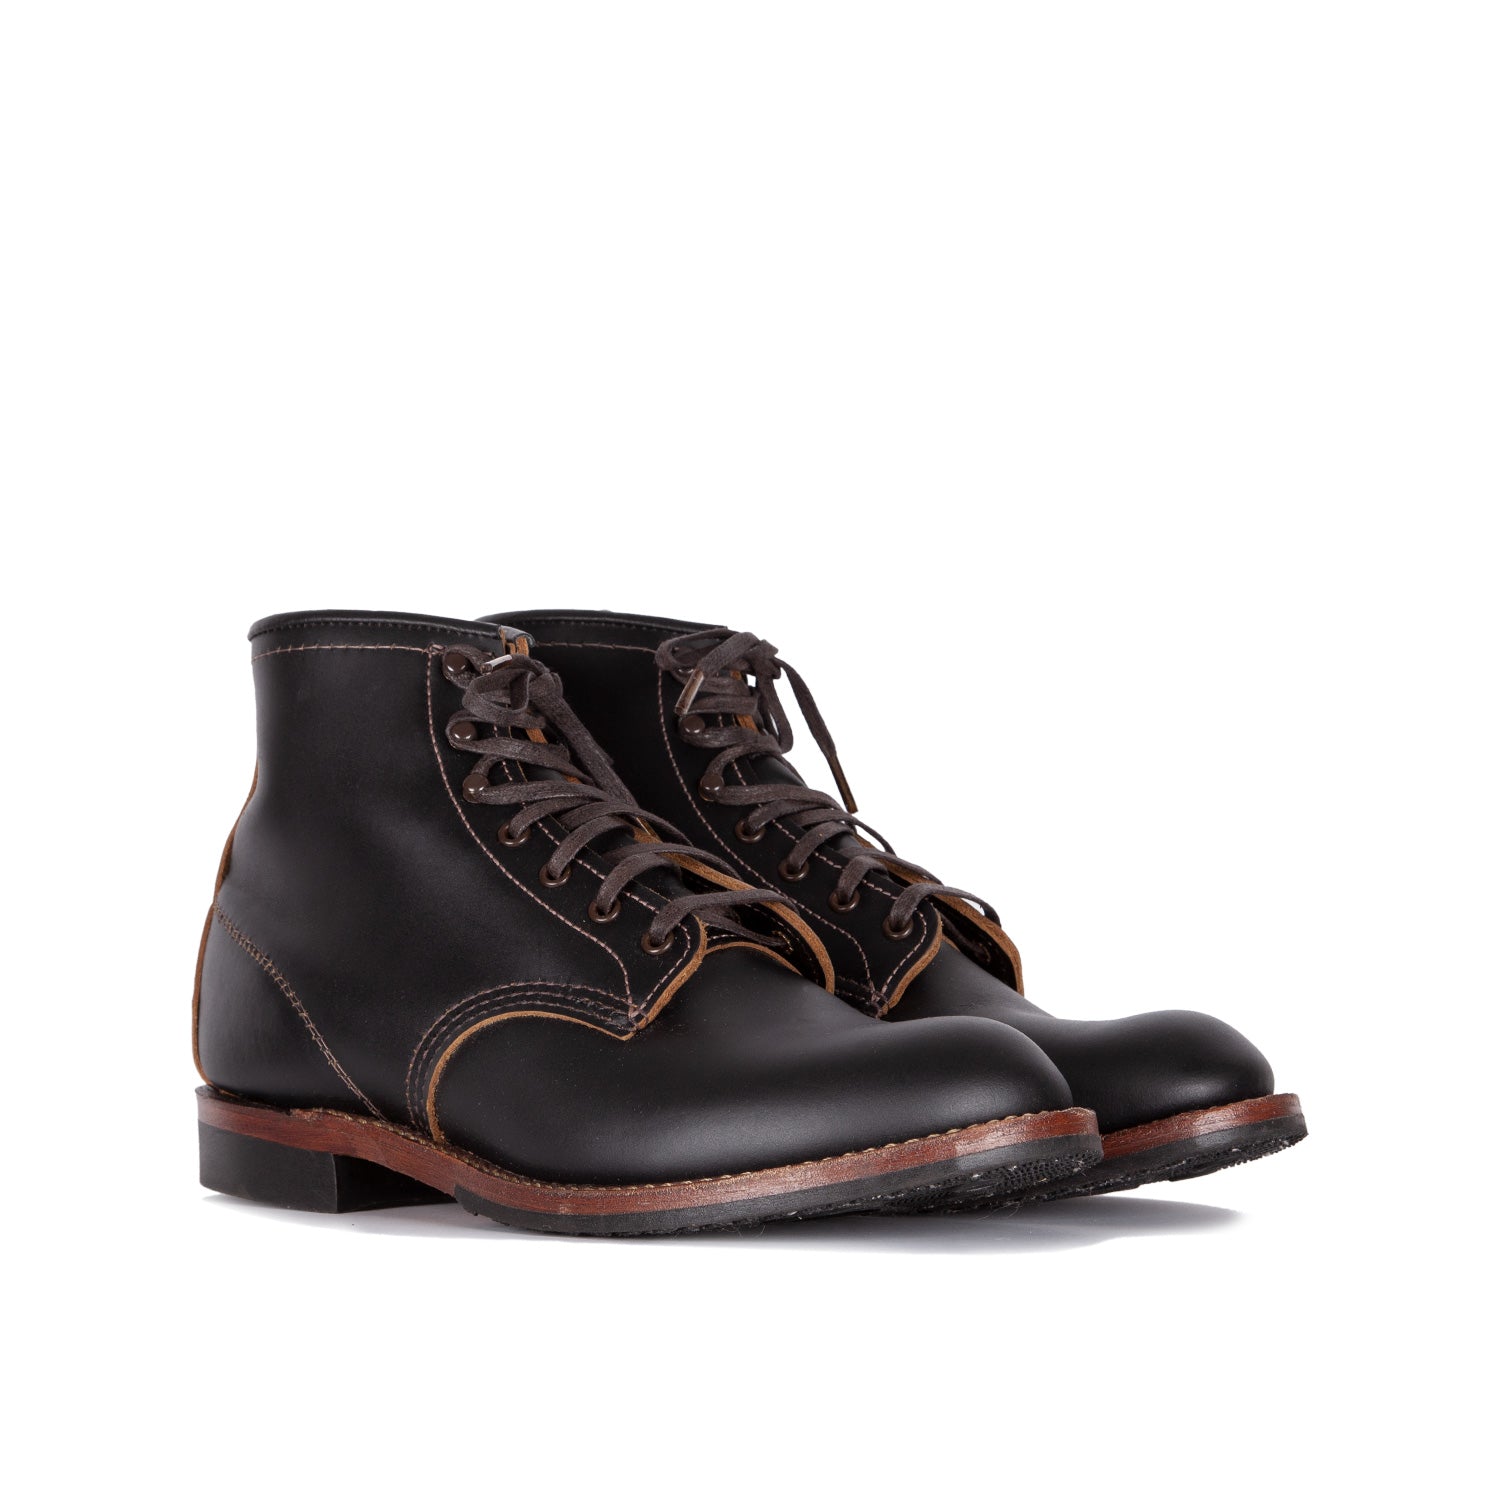 red wing 96 flat toe beckman